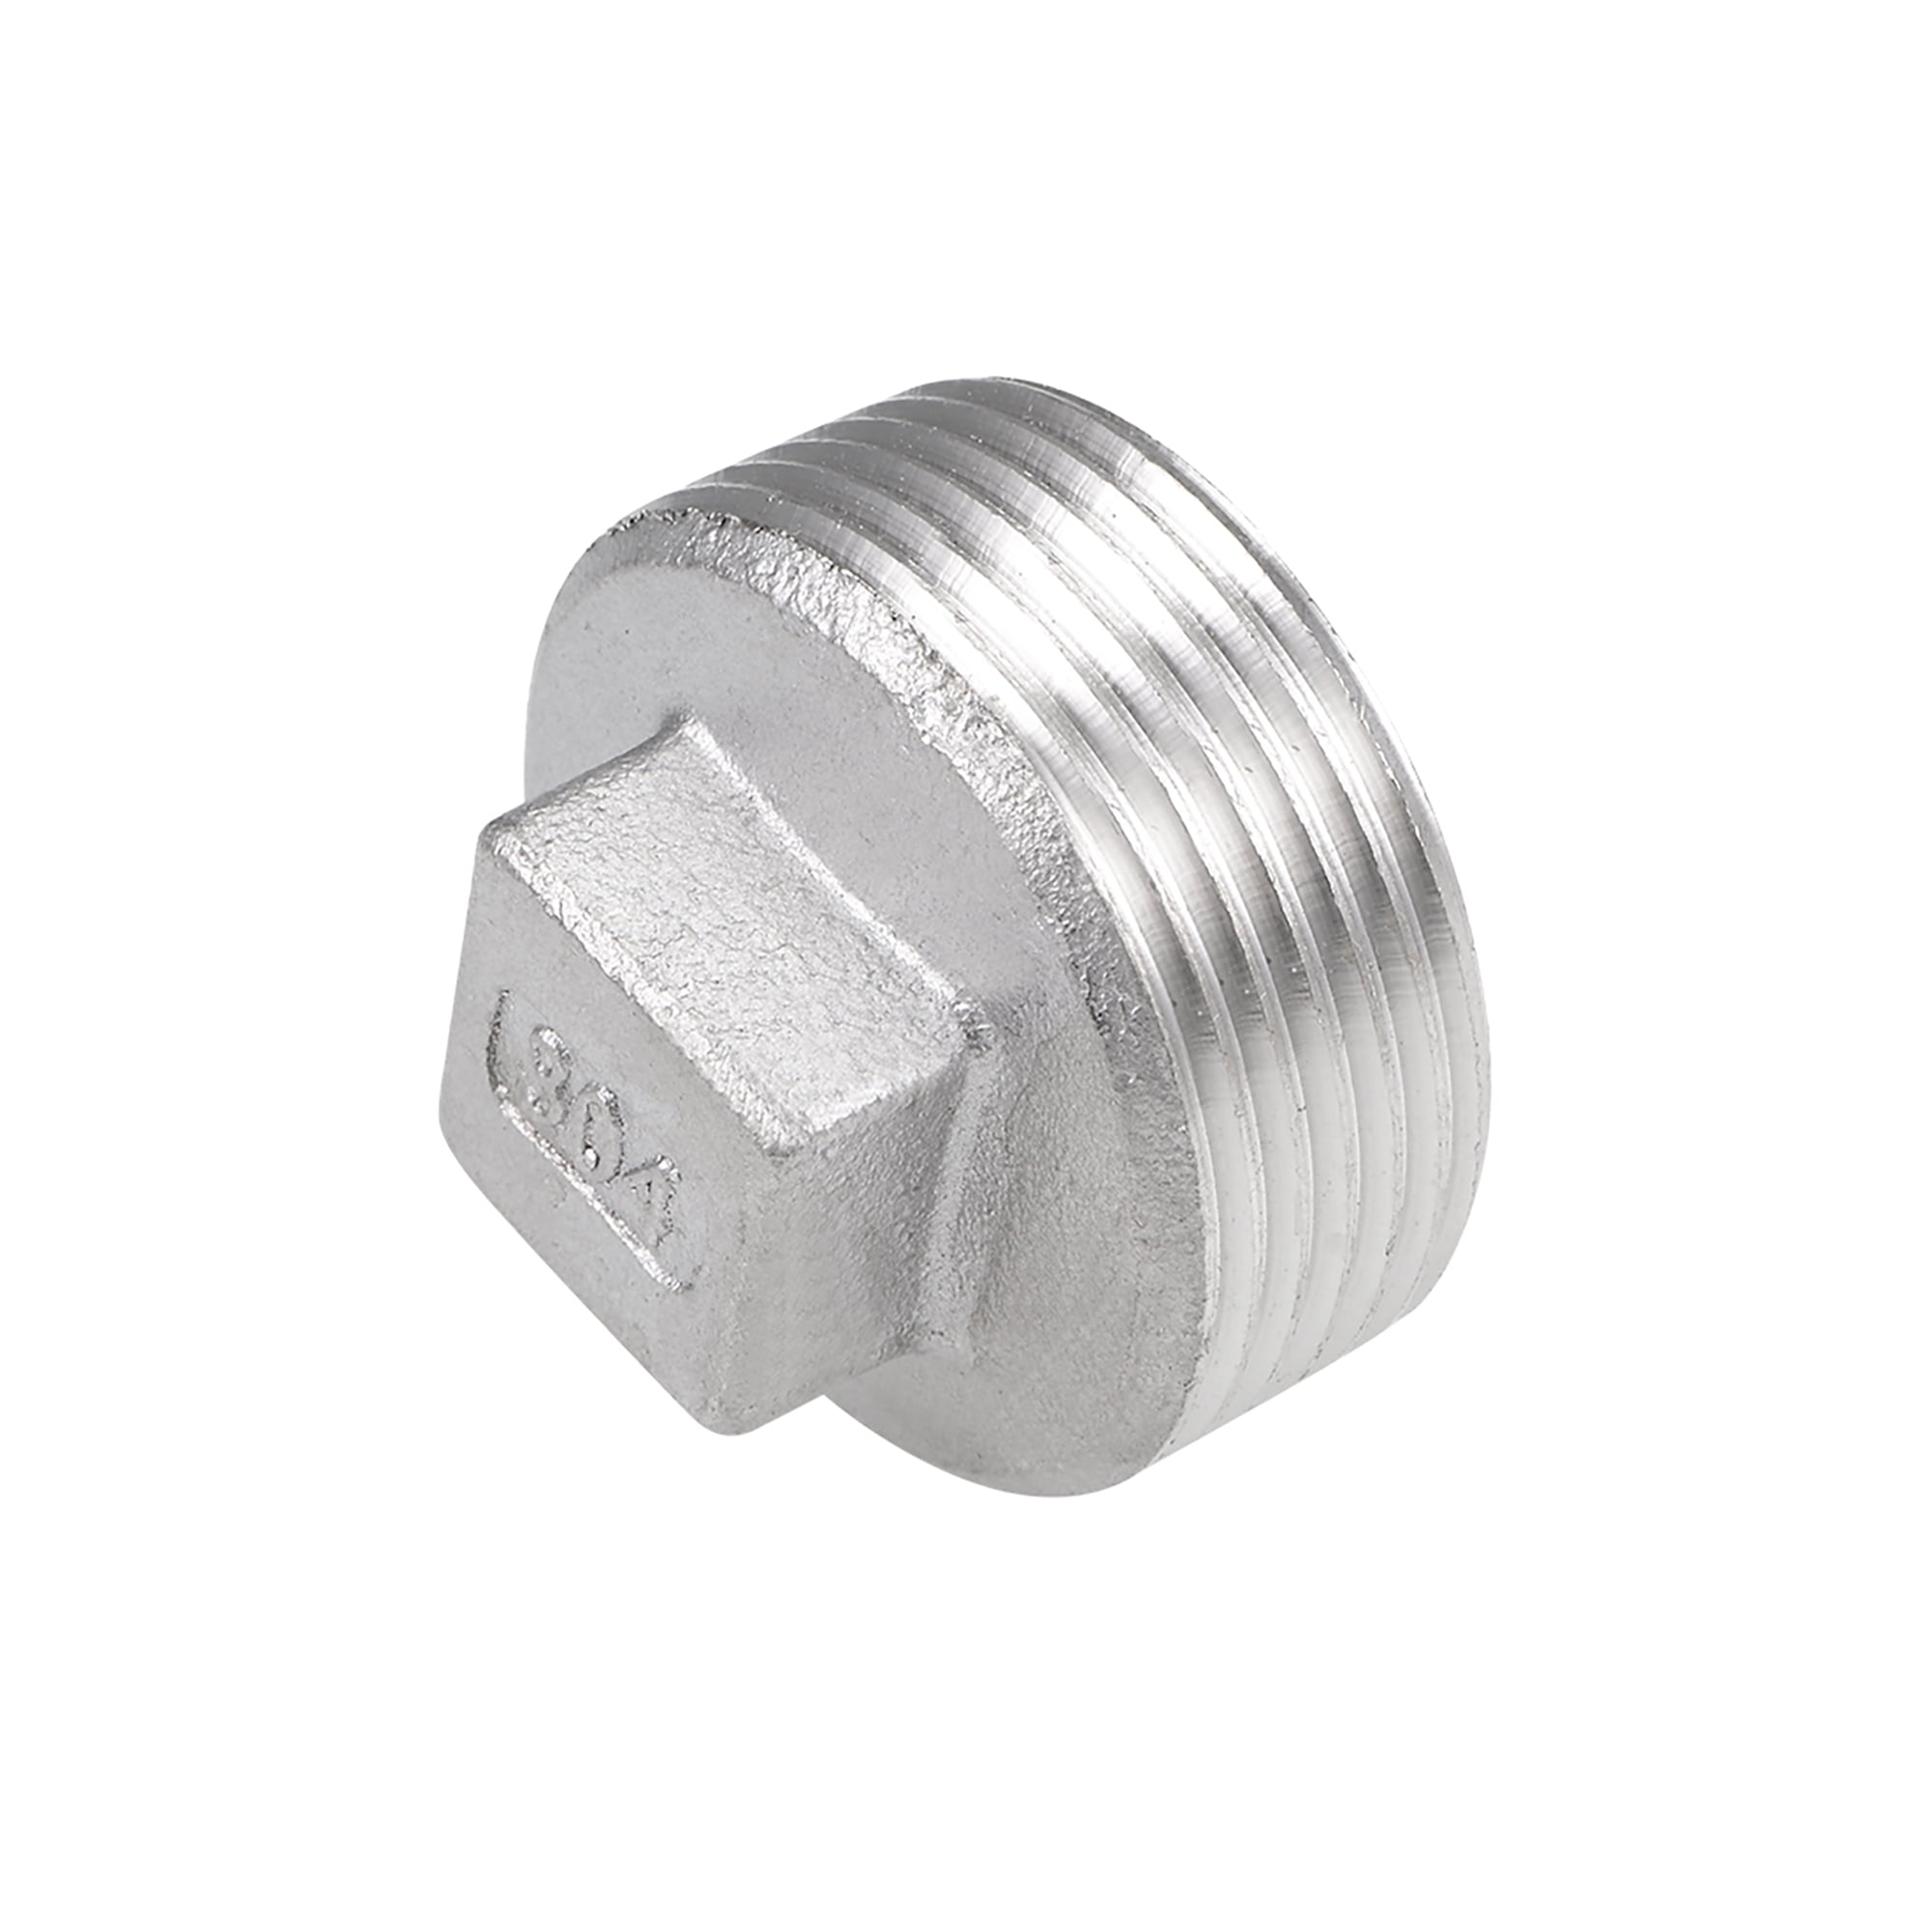 Details about   Stainless Steel Barb Hose Connector Adapter 14mm Barbed x G1/2 Female Pipe 3Pcs 